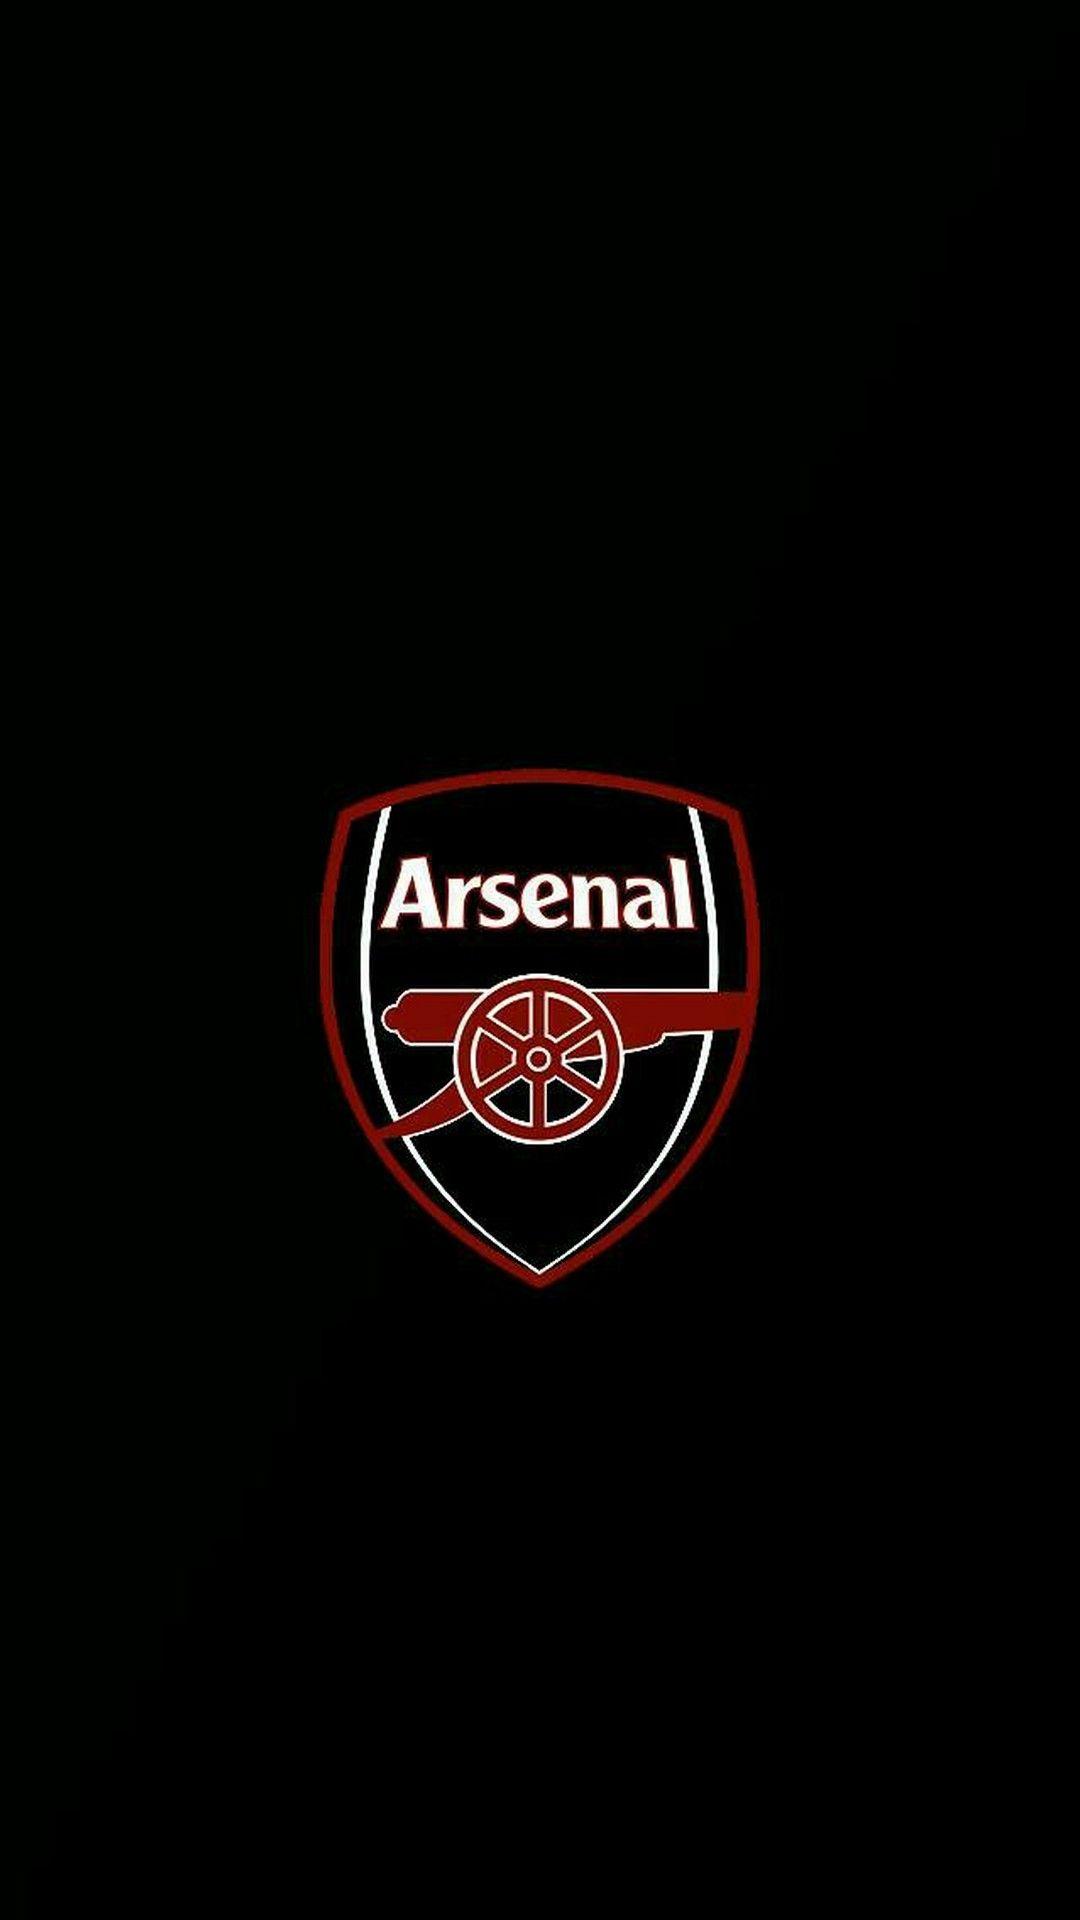 Arsenal FC Wallpaper Android Android Wallpaper